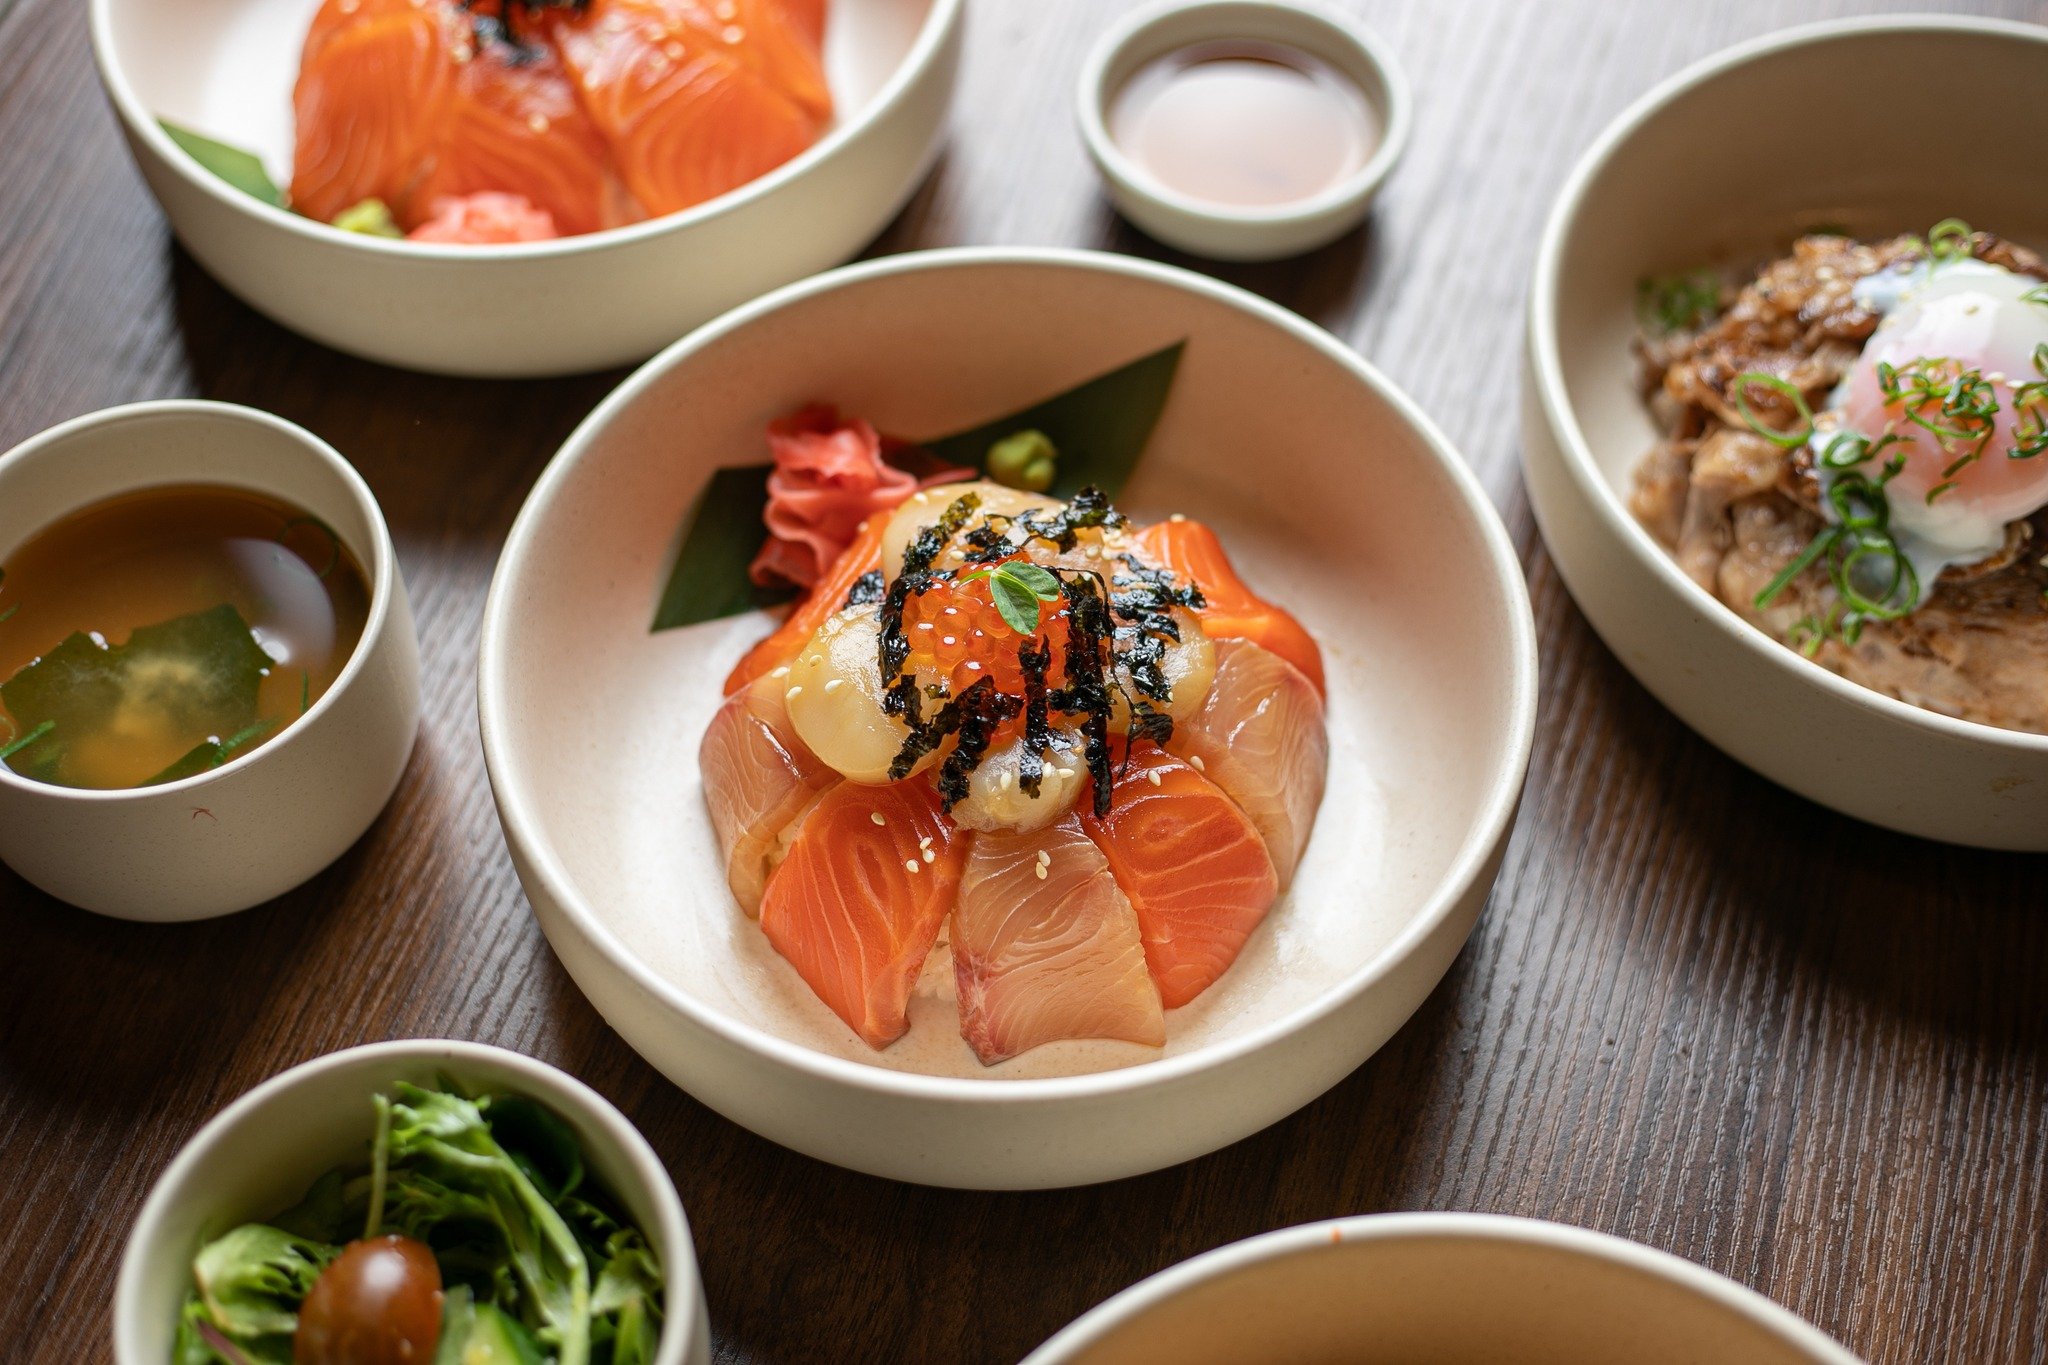 Chop Chop's weekday lunch menu is a feast for the senses! 

Check out our Sashimi Don featuring soy-cured salmon, kingfish, scallop, and salmon roe. Plus, many other tempting don options to choose from!

Book now through the link in our bio.

#ChopCh